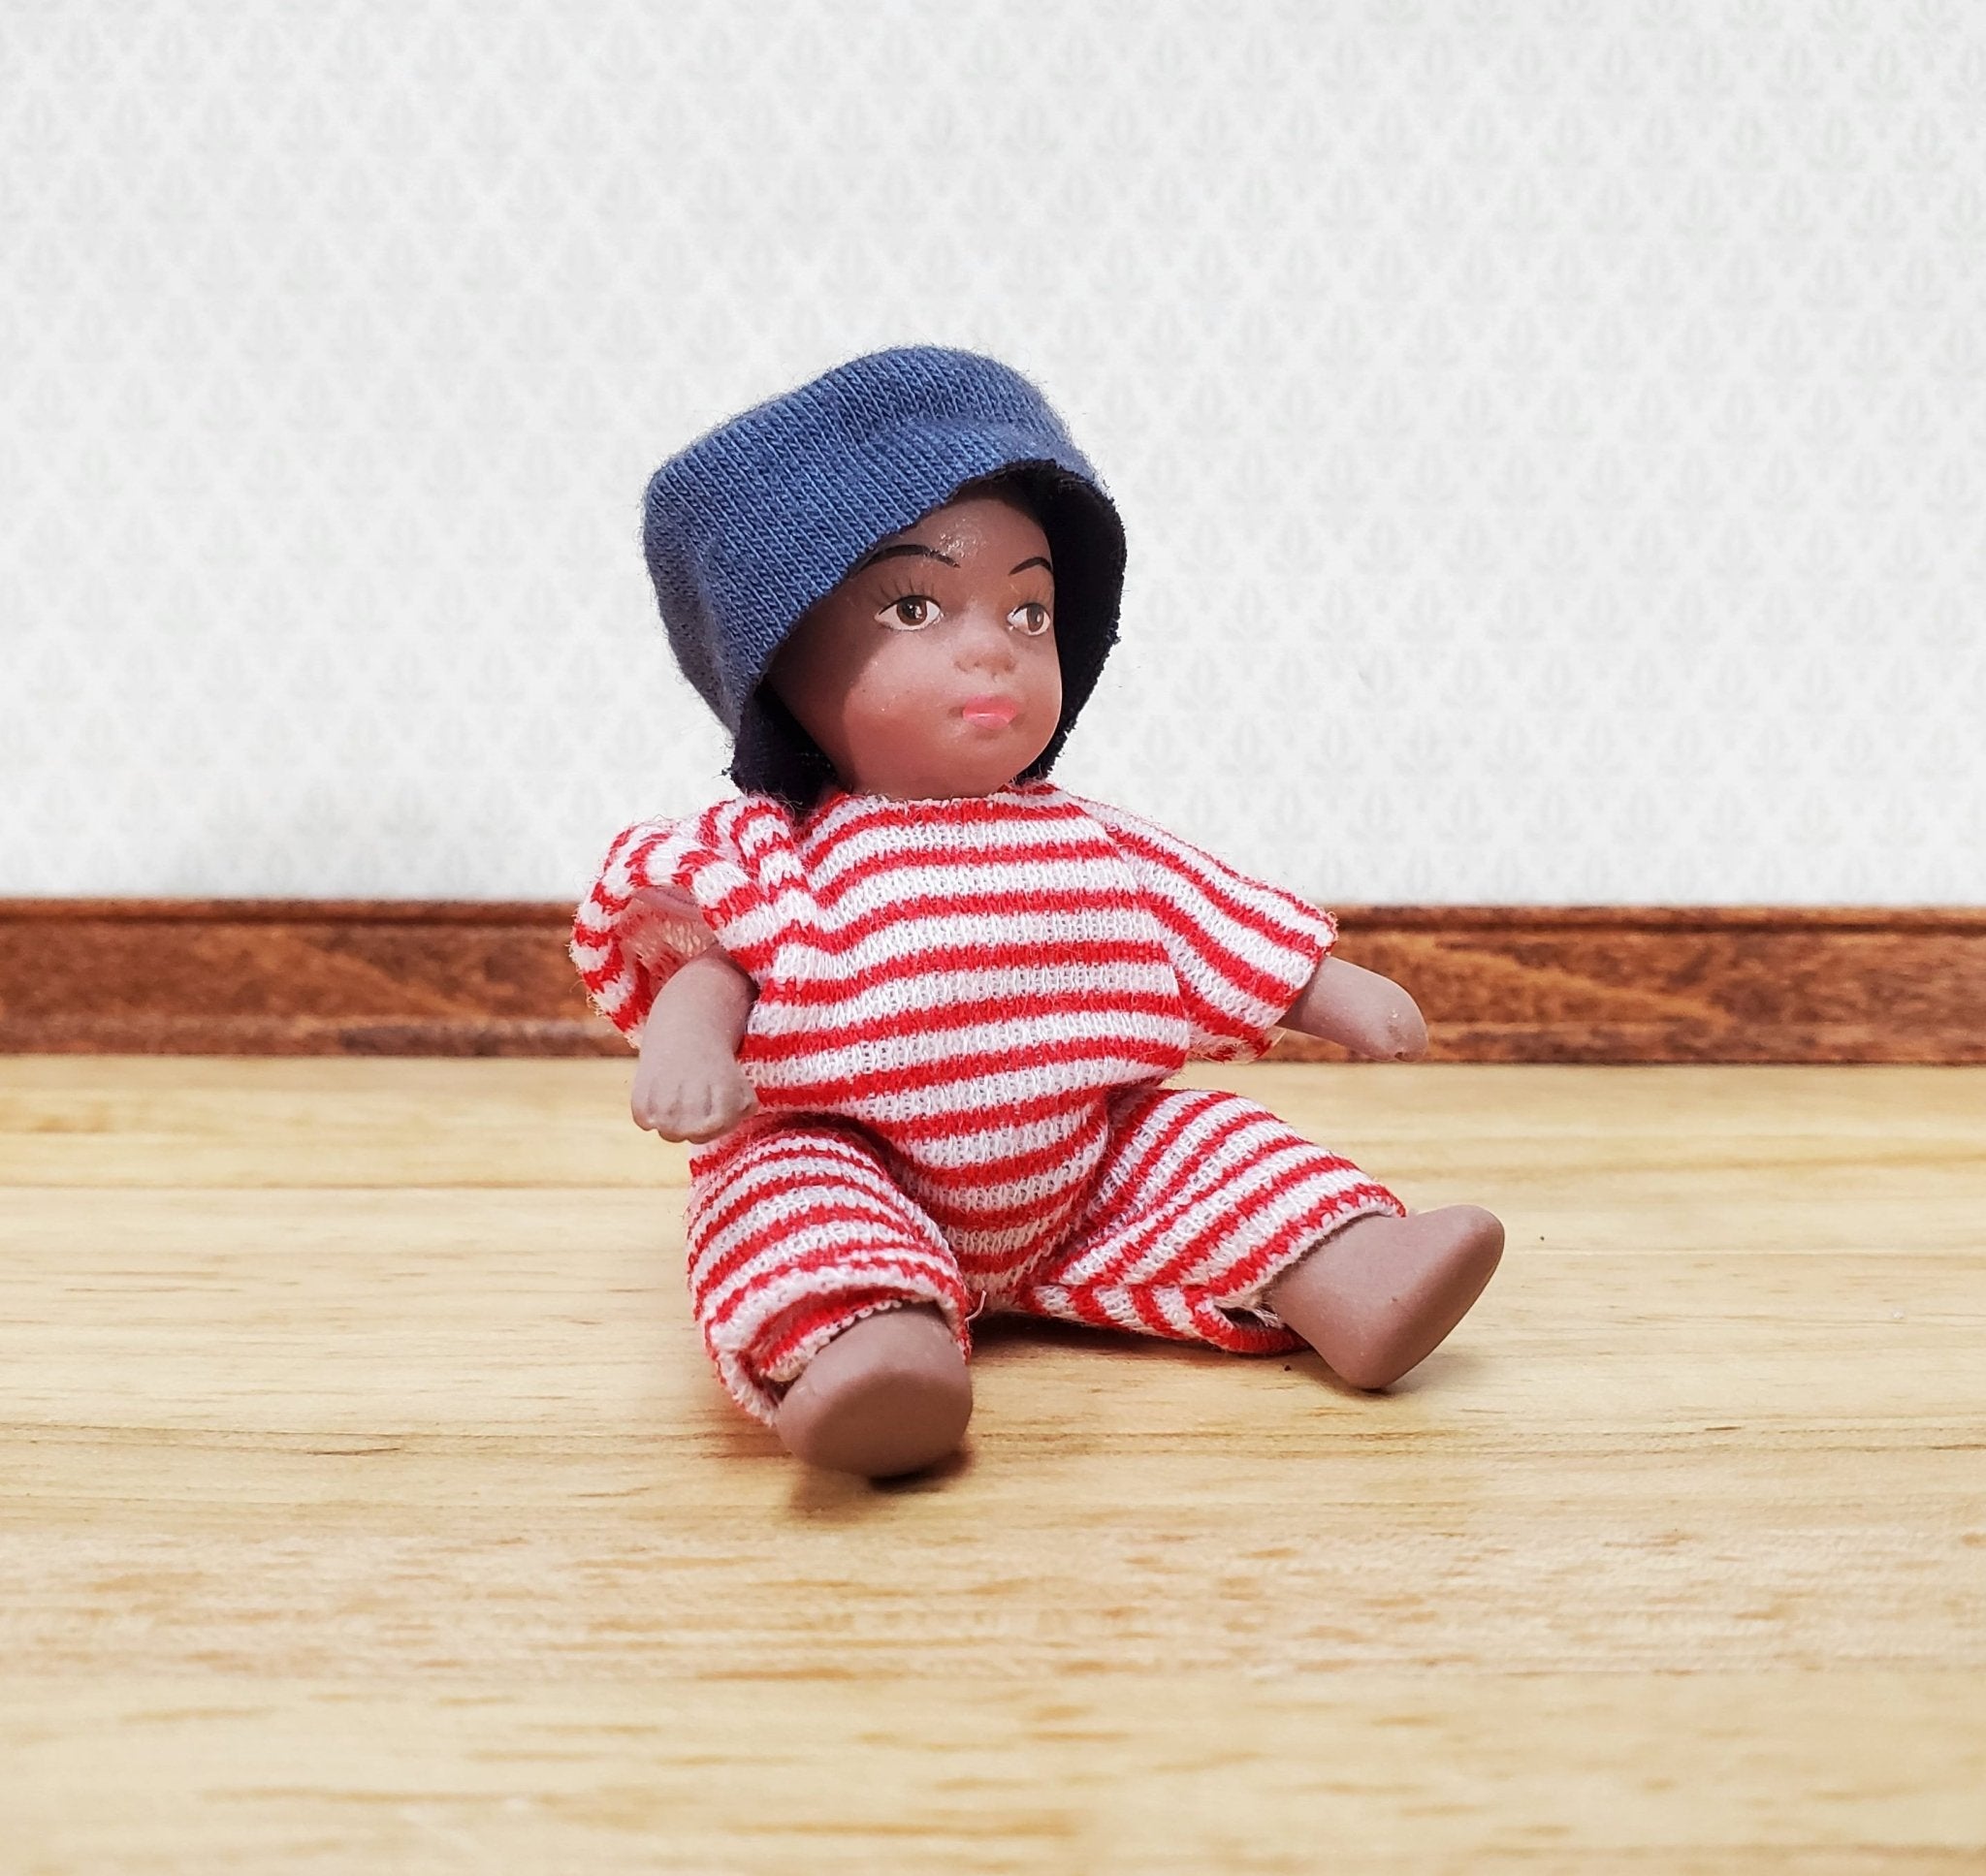 Dollhouse Miniature Pink Hoodie or Robe 1:12 Scale Clothes Wearable fits 6  Phicen - Miniature Crush